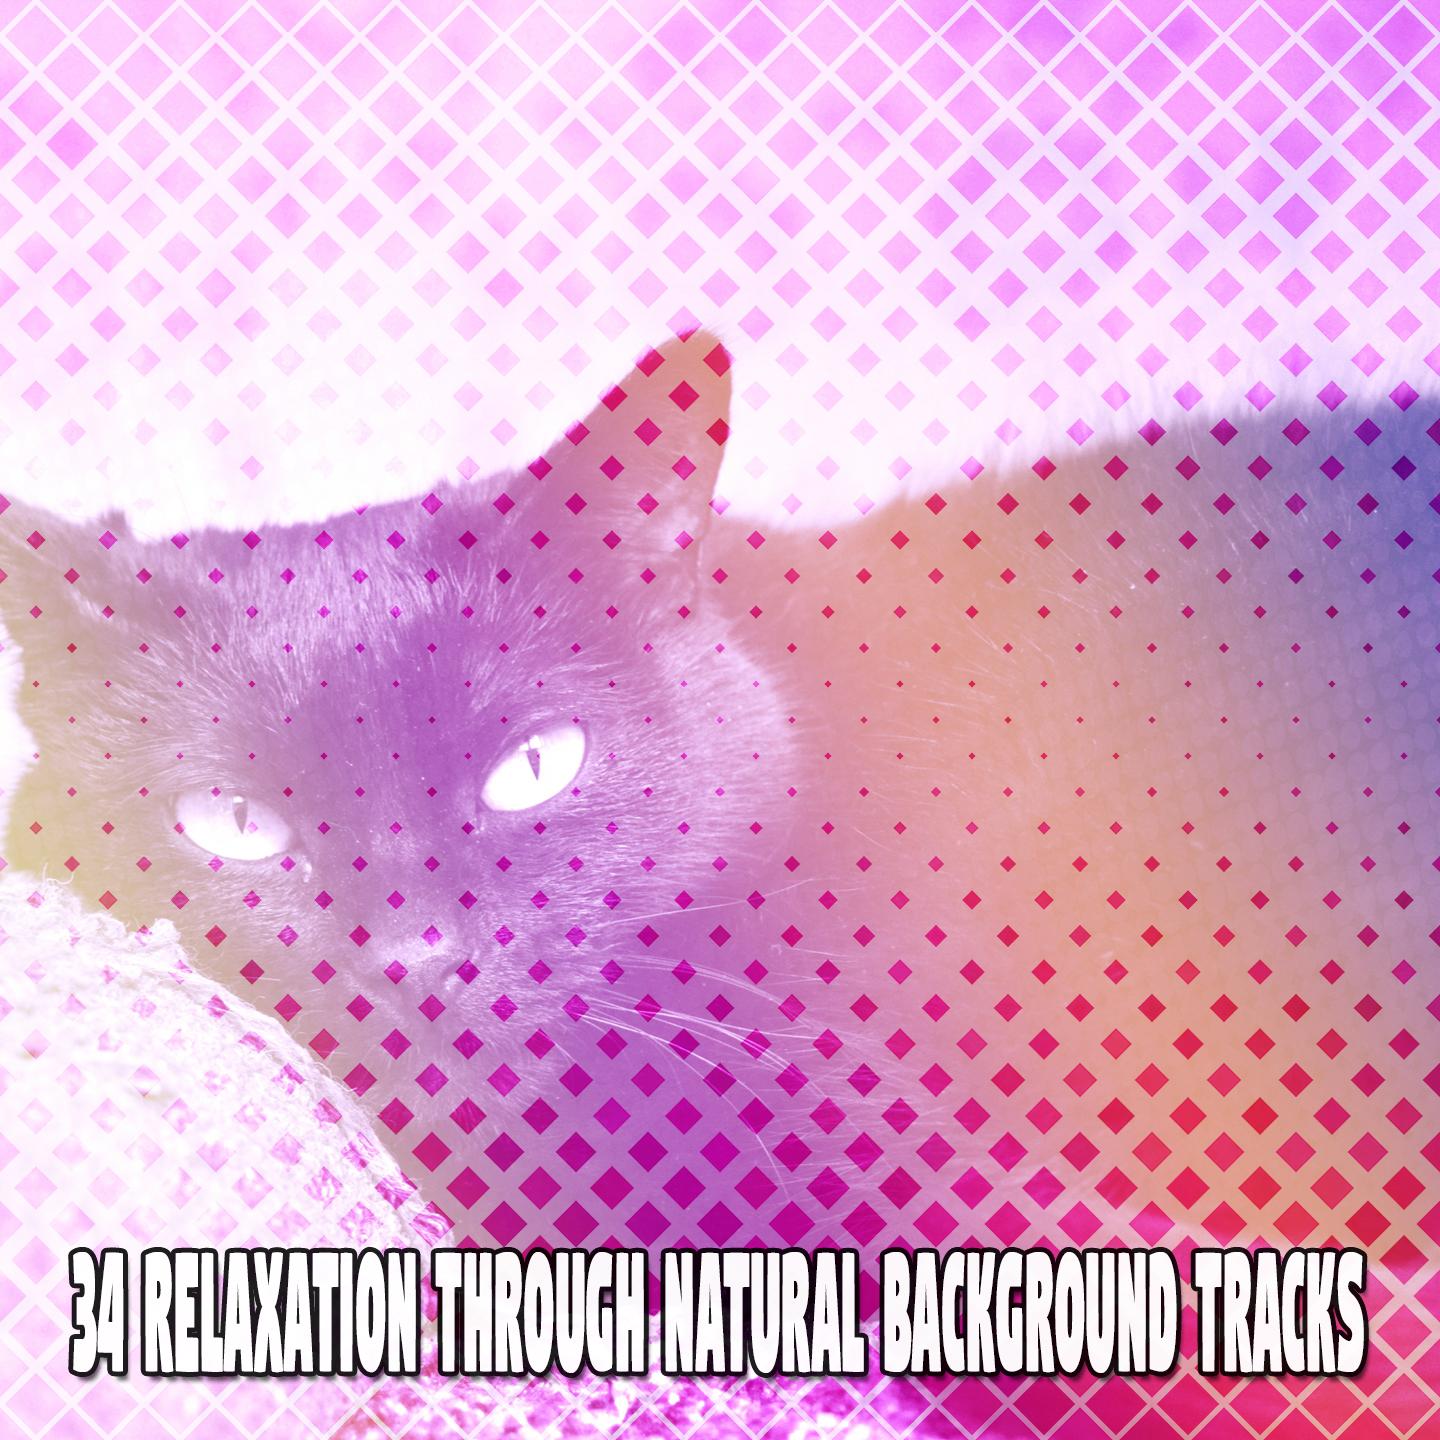 34 Relaxation Through Natural Background Tracks